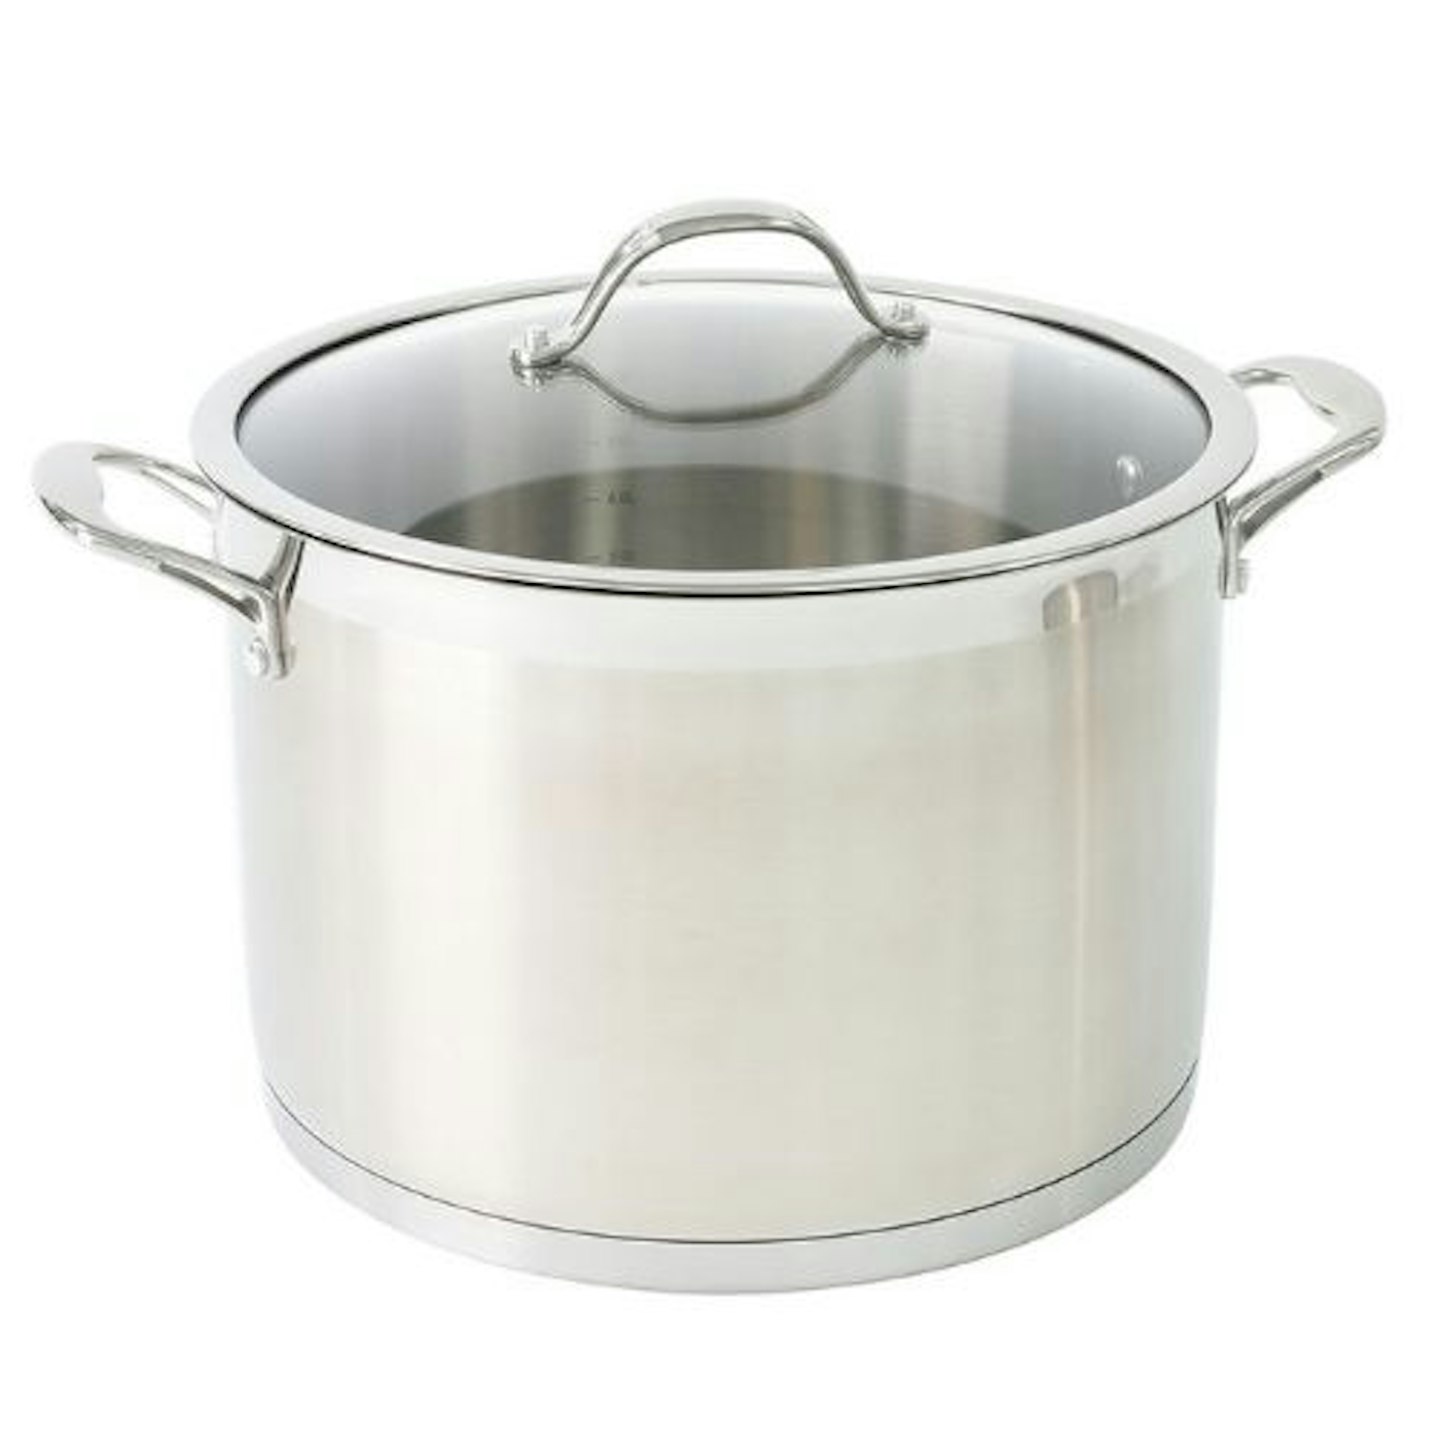 https://images.bauerhosting.com/affiliates/sites/10/2023/10/Professional-Stainless-Steel-Stockpot-And-Lid.jpg?auto=format&w=1440&q=80